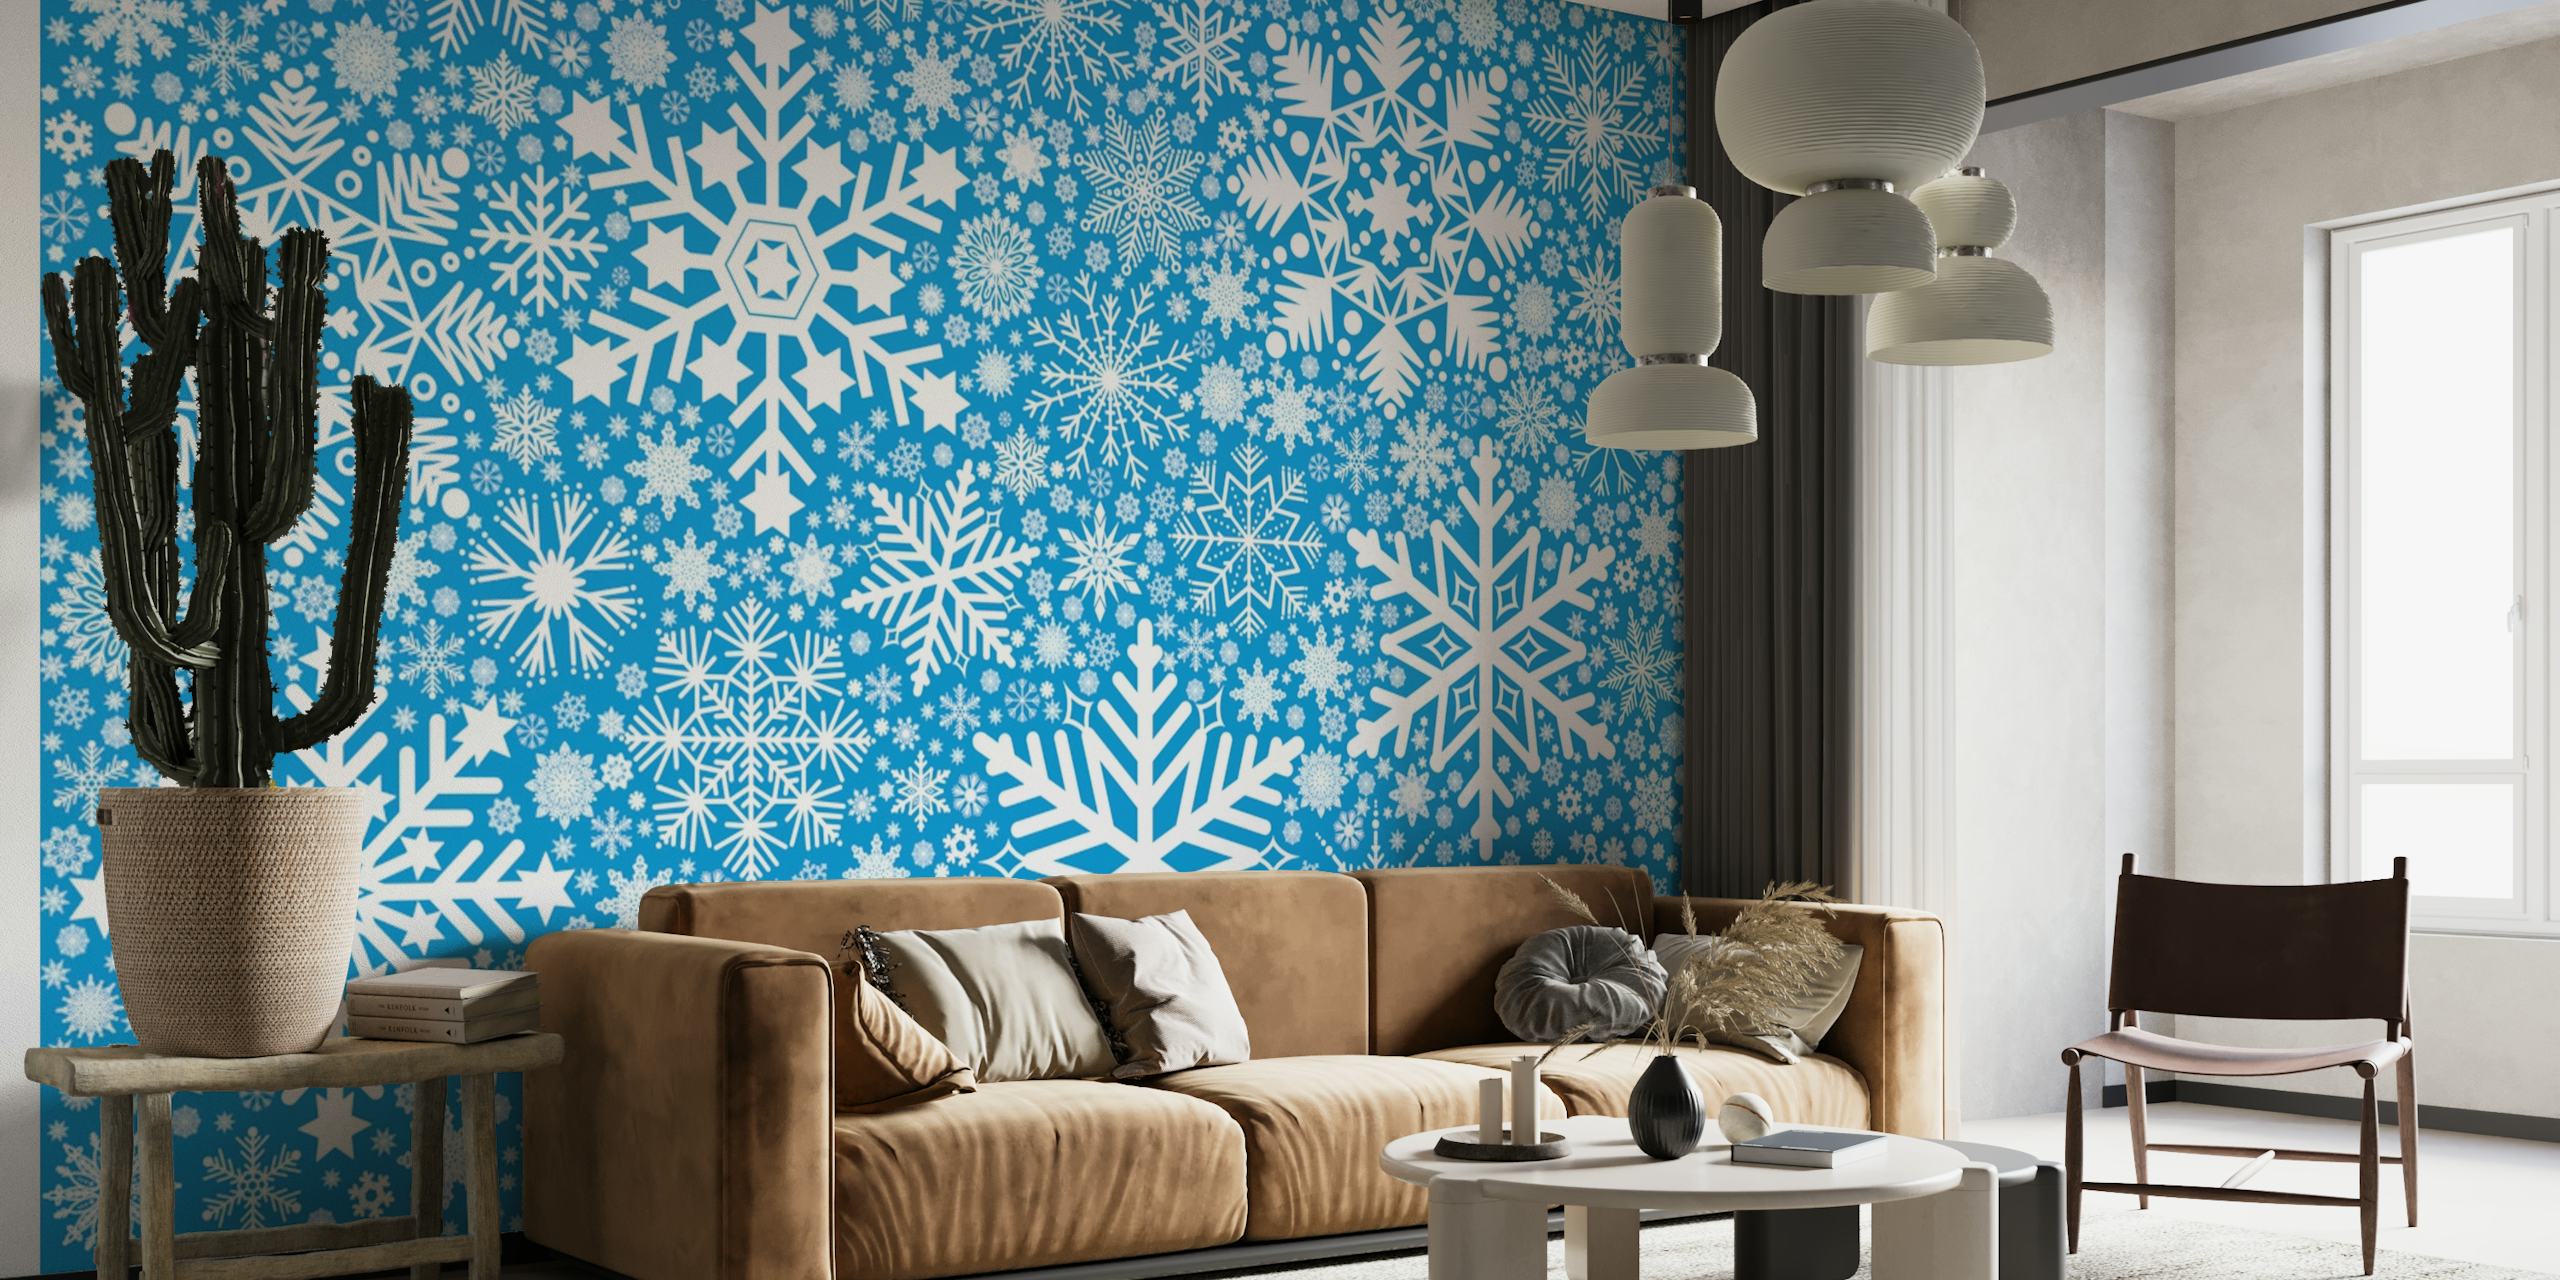 Snowflakes Background 2 behang